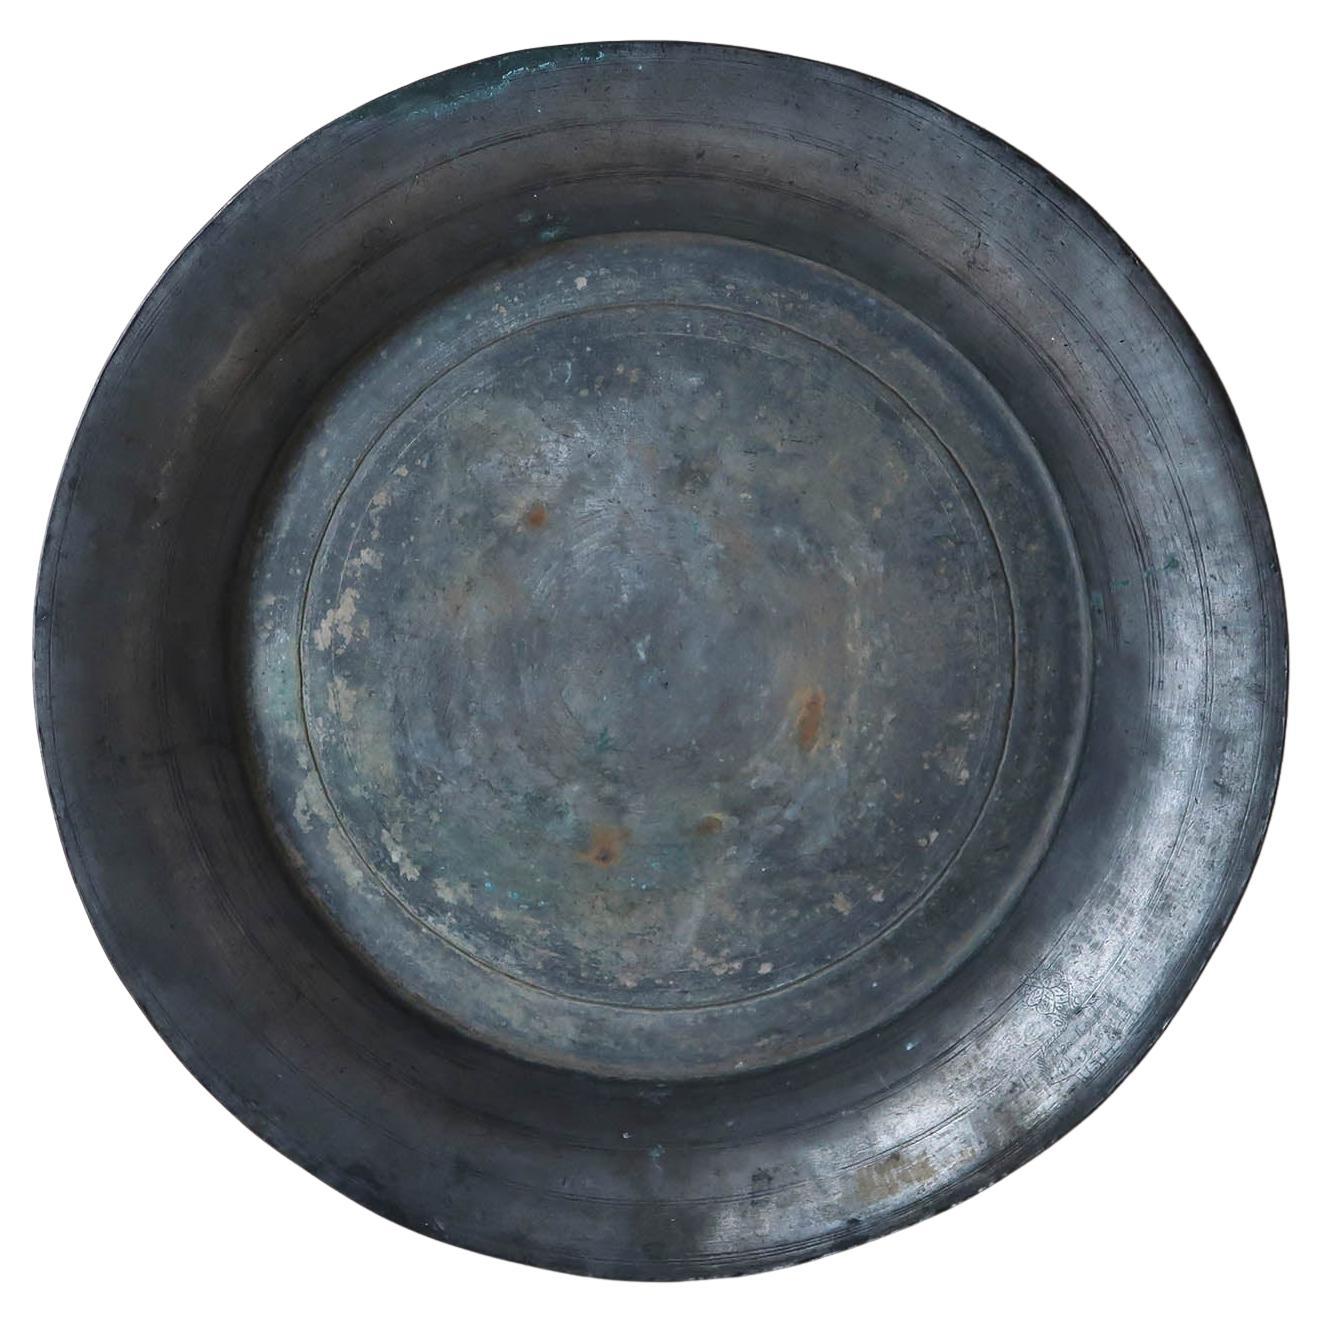 Monumental Antique Pewter Dish With Ownership Inscription